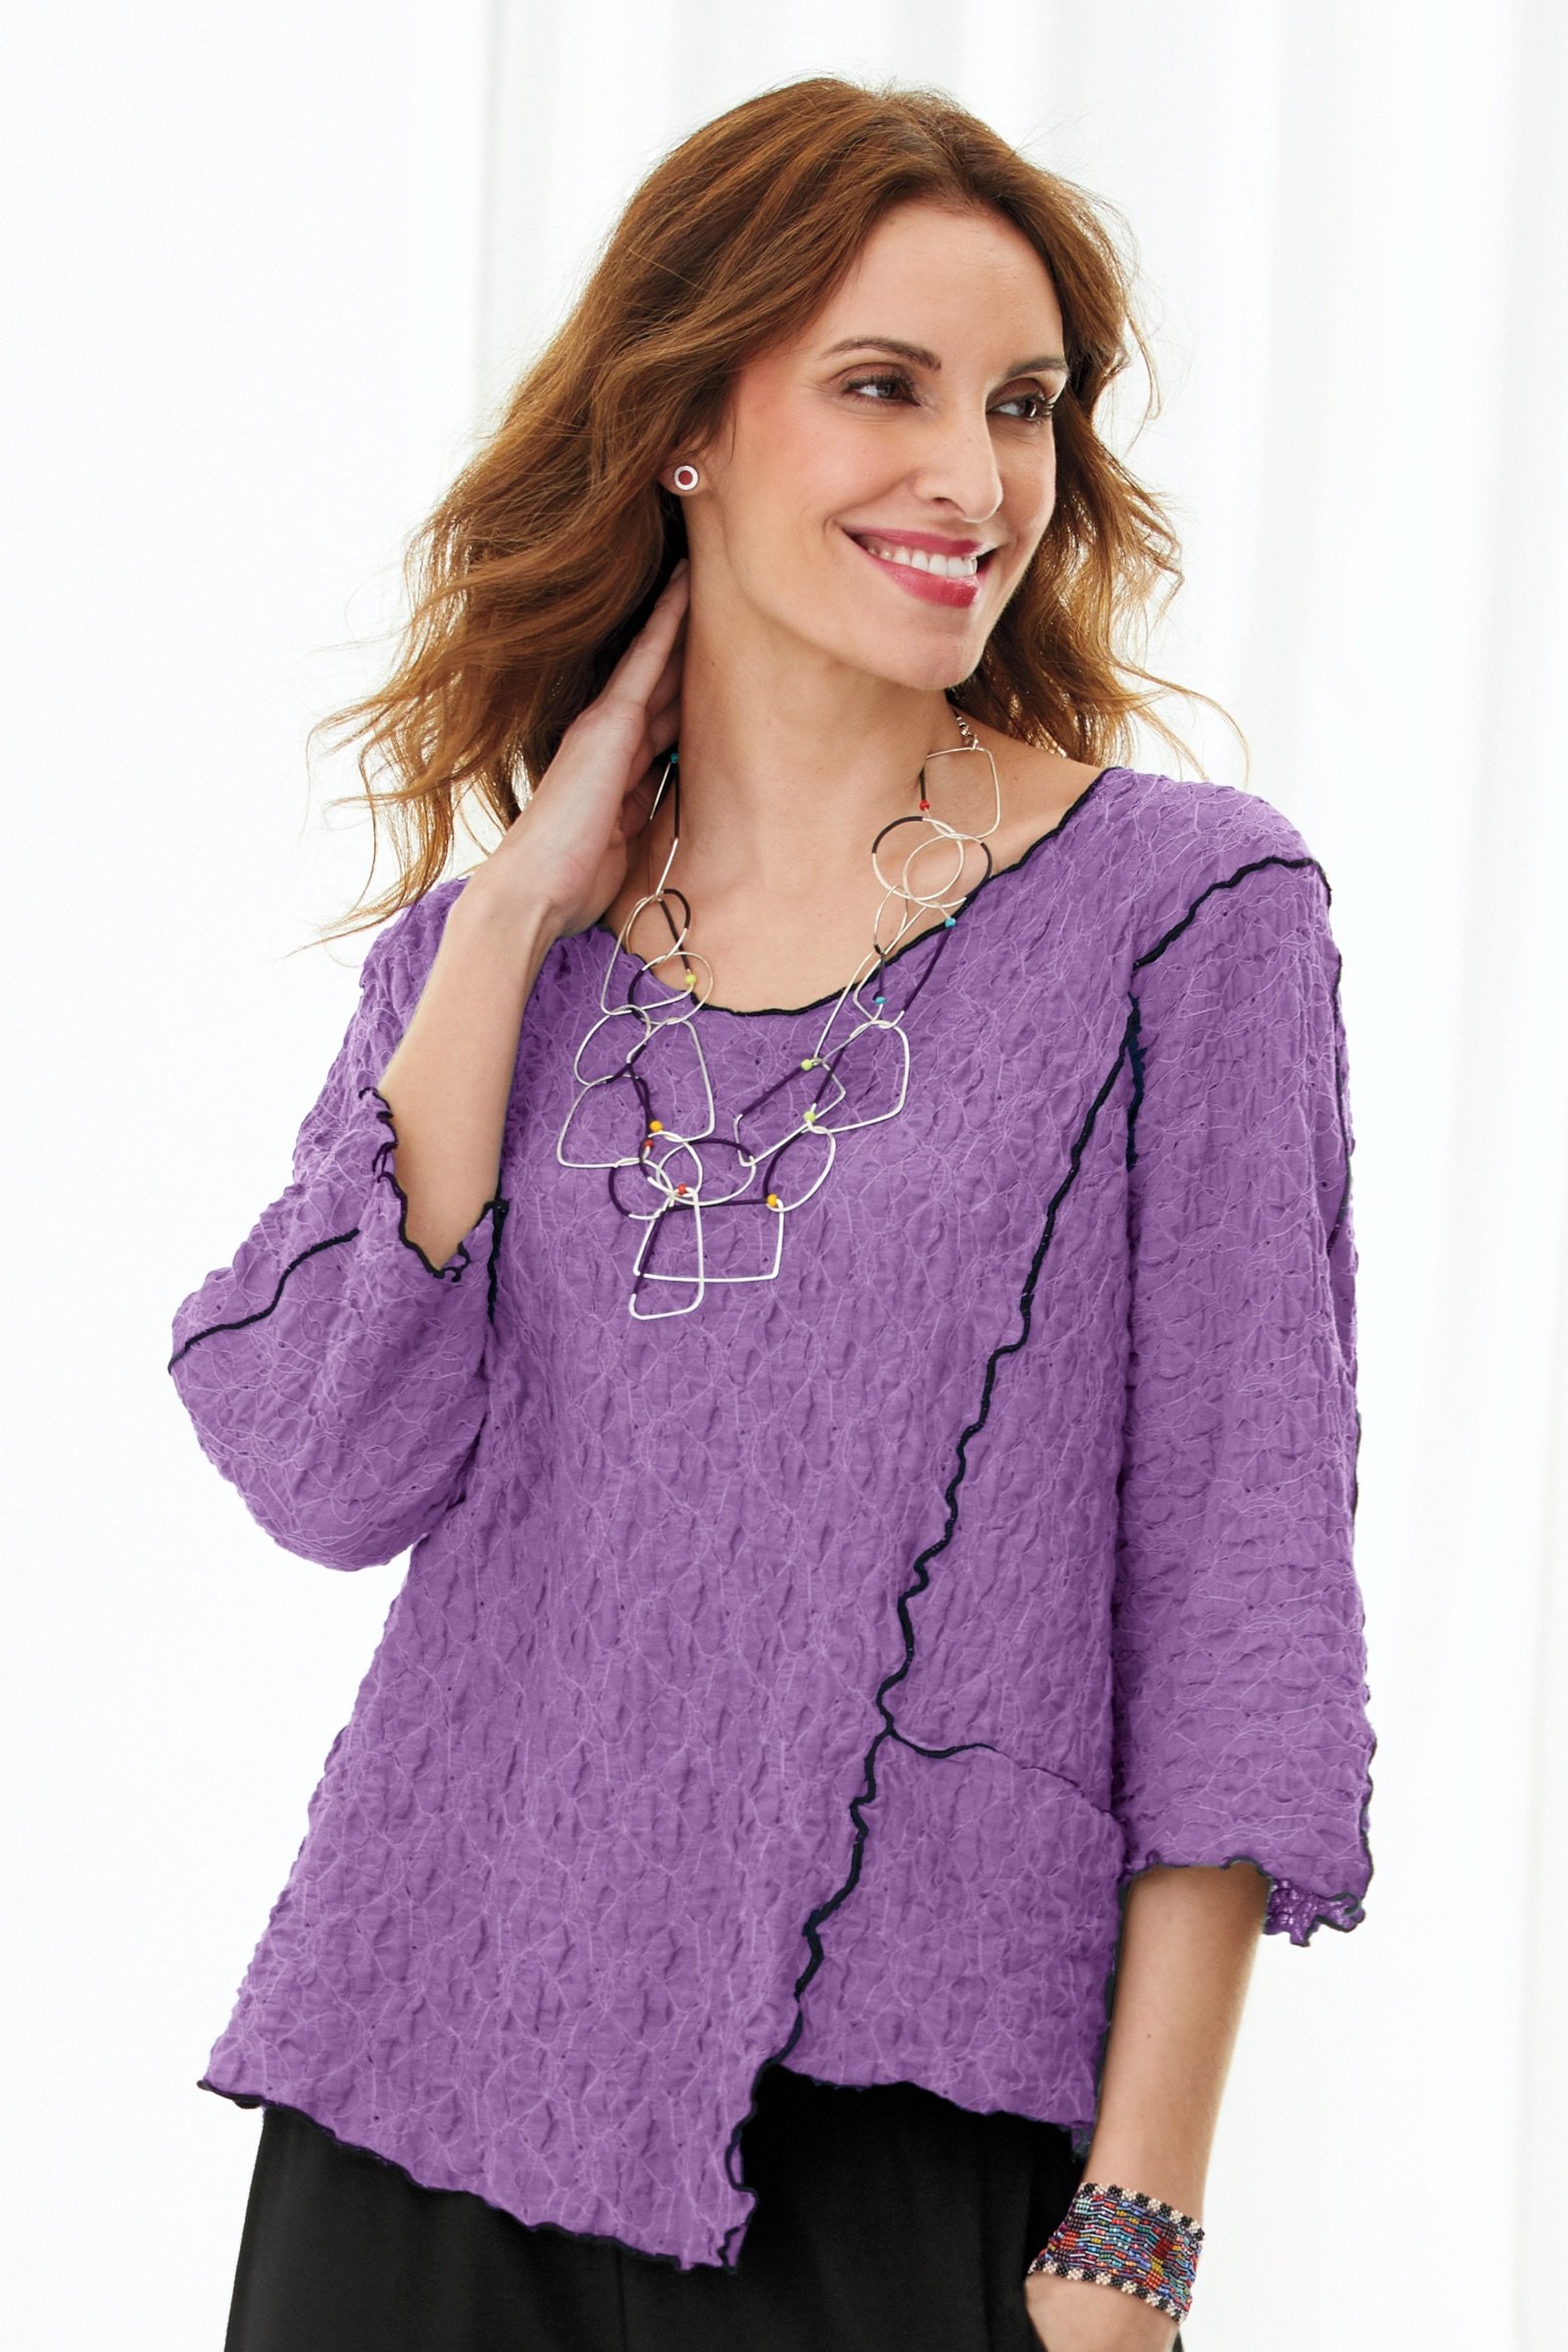 Pucker Angle  Top  by Noblu Knit Top  Artful Home